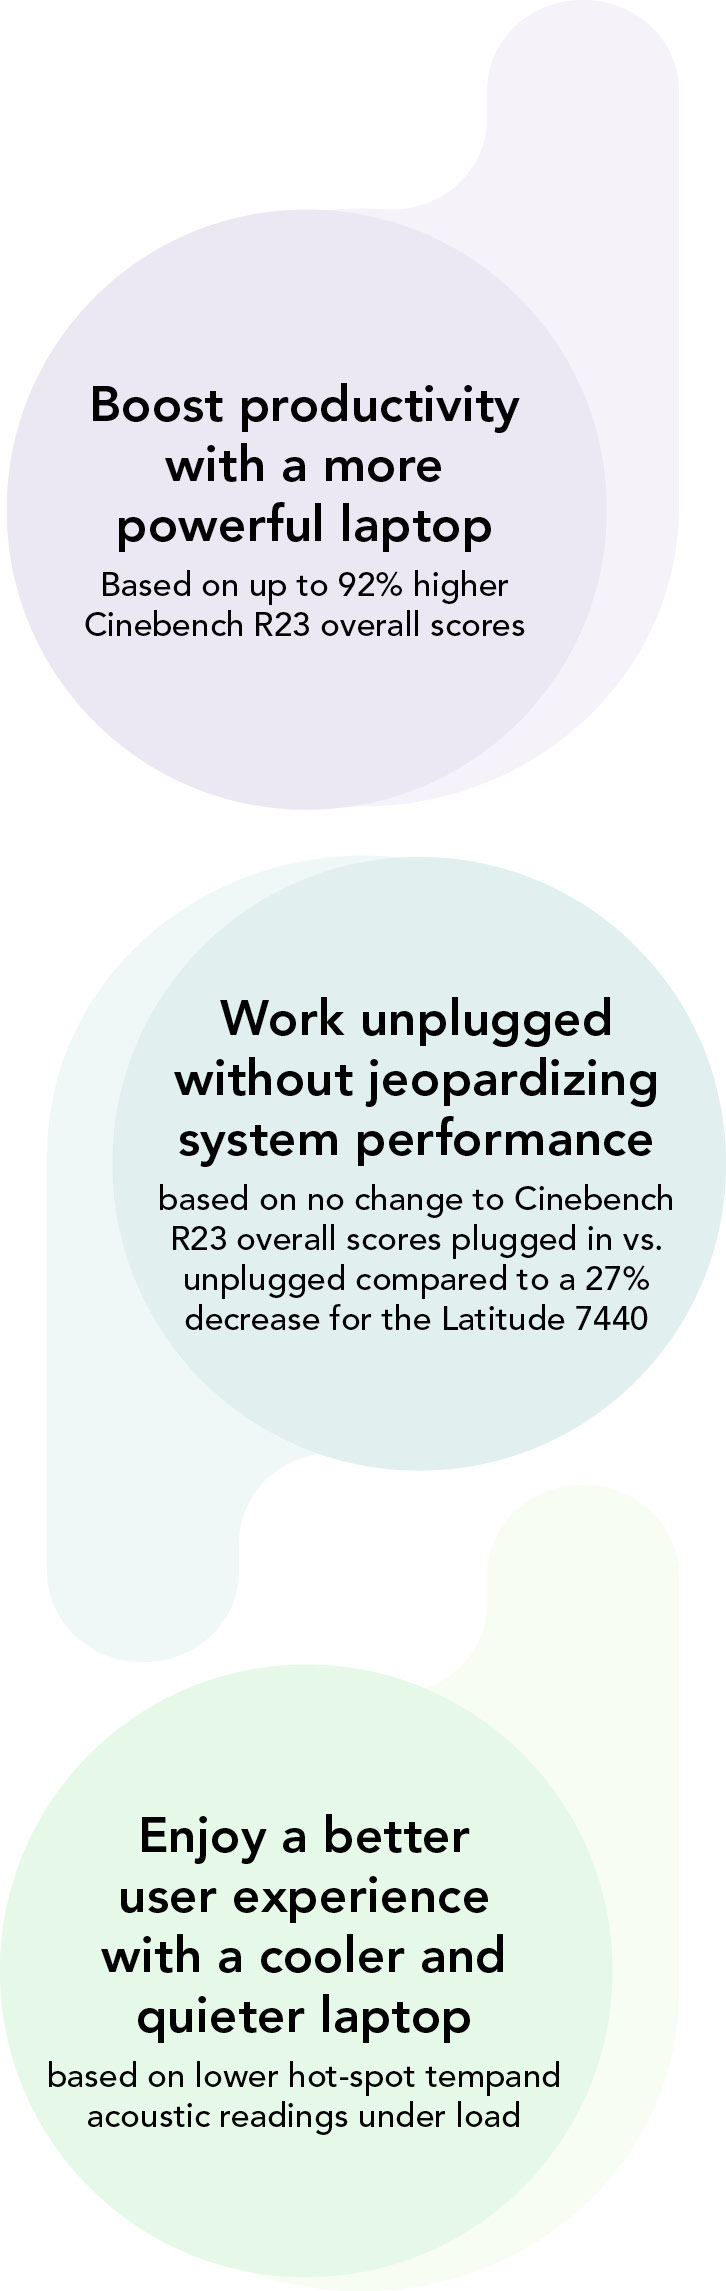 Boost productivity with a more powerful laptop (based on up to 92% higher Cinebench R23 overall scores). Work unplugged without jeopardizing system performance (based on no change to Cinebench R23 overall scores plugged in vs. unplugged compared to a 27% decrease for the Latitude 7440). Enjoy a better use experience with a cooler and quieter laptop (based on lower hot-spot temp and acoustic readings under load).  